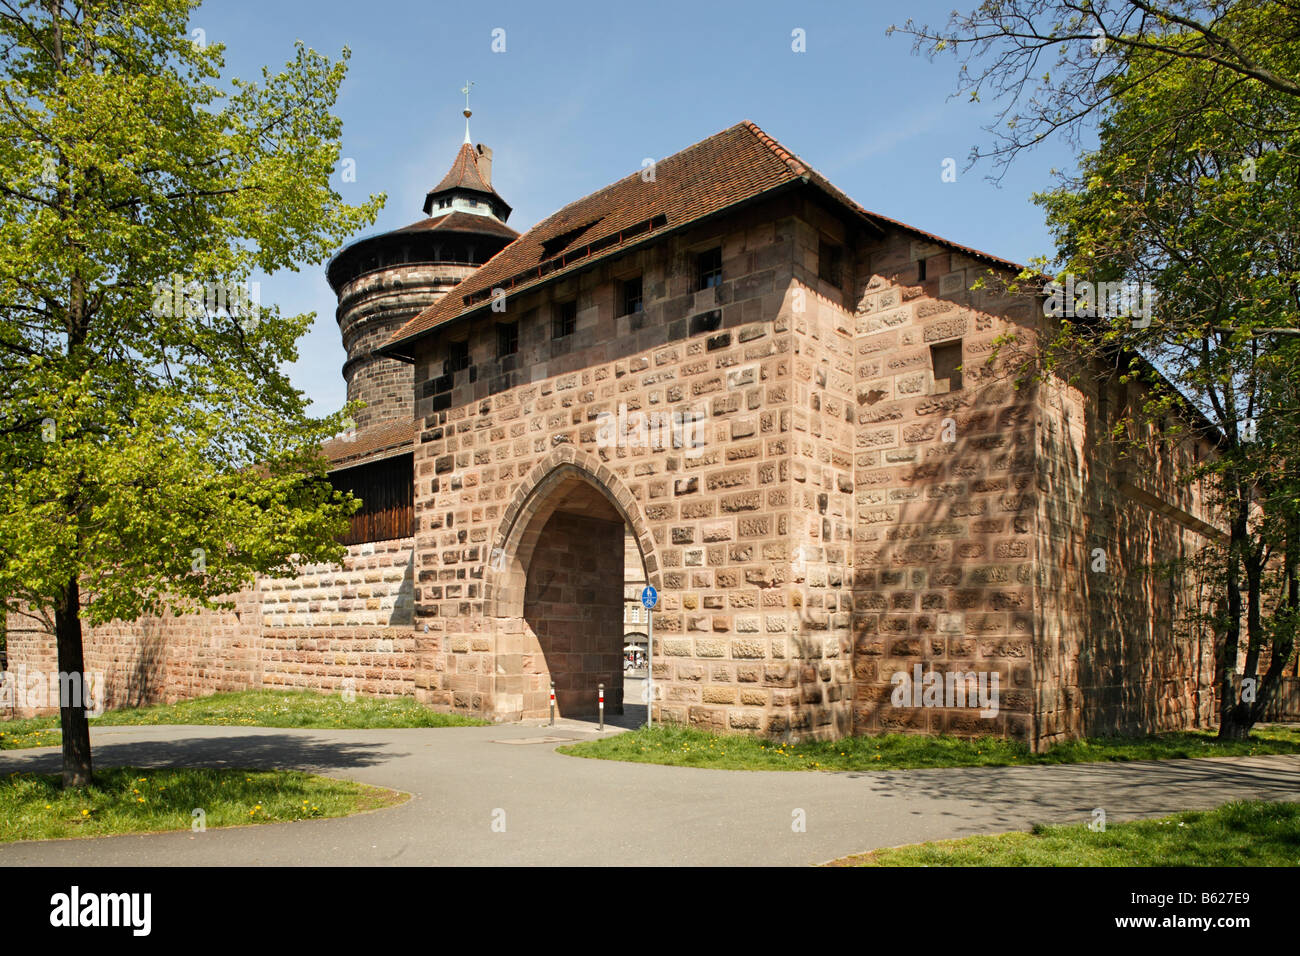 Splittertor Gate, city wall, fortified tower, historic city centre, Nuremberg, Middle Franconia, Bavaria, Germany, Europe Stock Photo